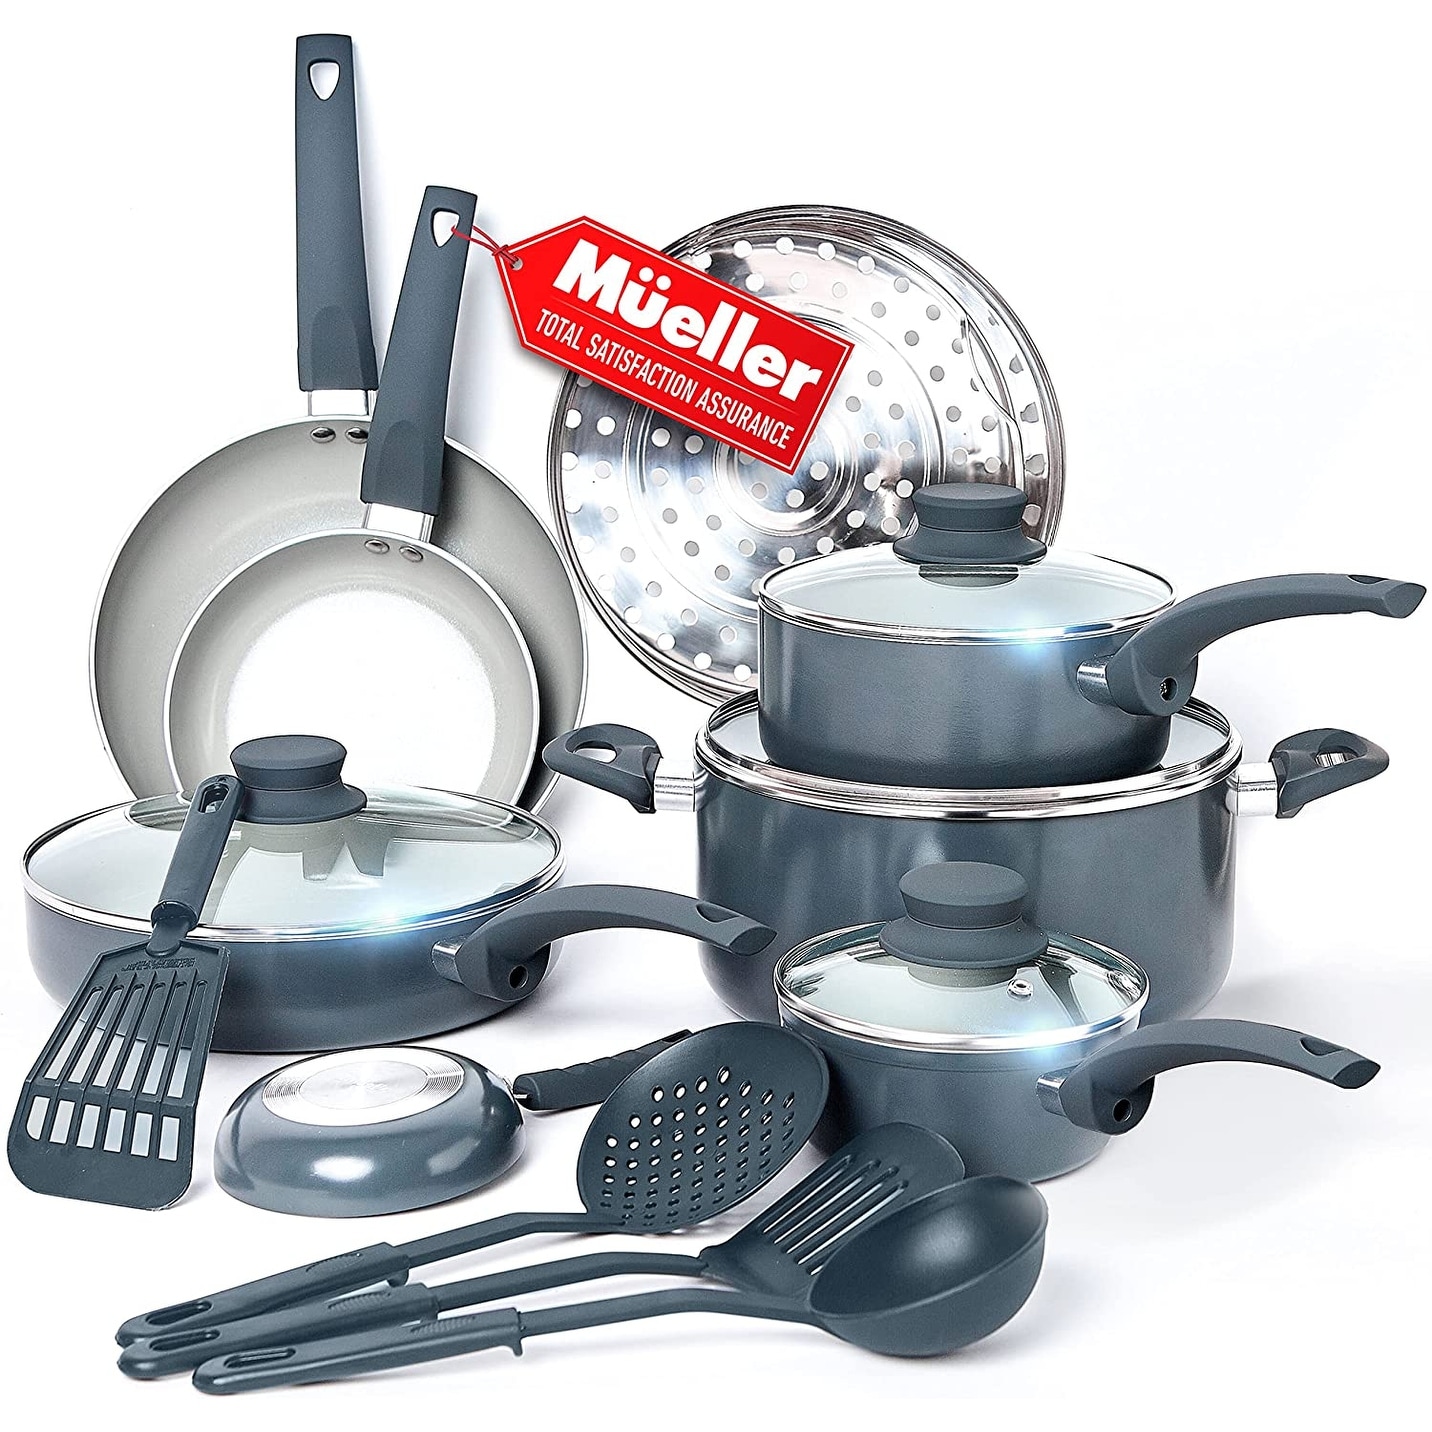 https://ak1.ostkcdn.com/images/products/is/images/direct/a752f348dd25deb4f9158b8aa4e73a6ca860a1ad/Pots-and-Pans-Set-Nonstick-16-Piece-Healthy-Stone-Kitchen-Cookware-Sets.jpg